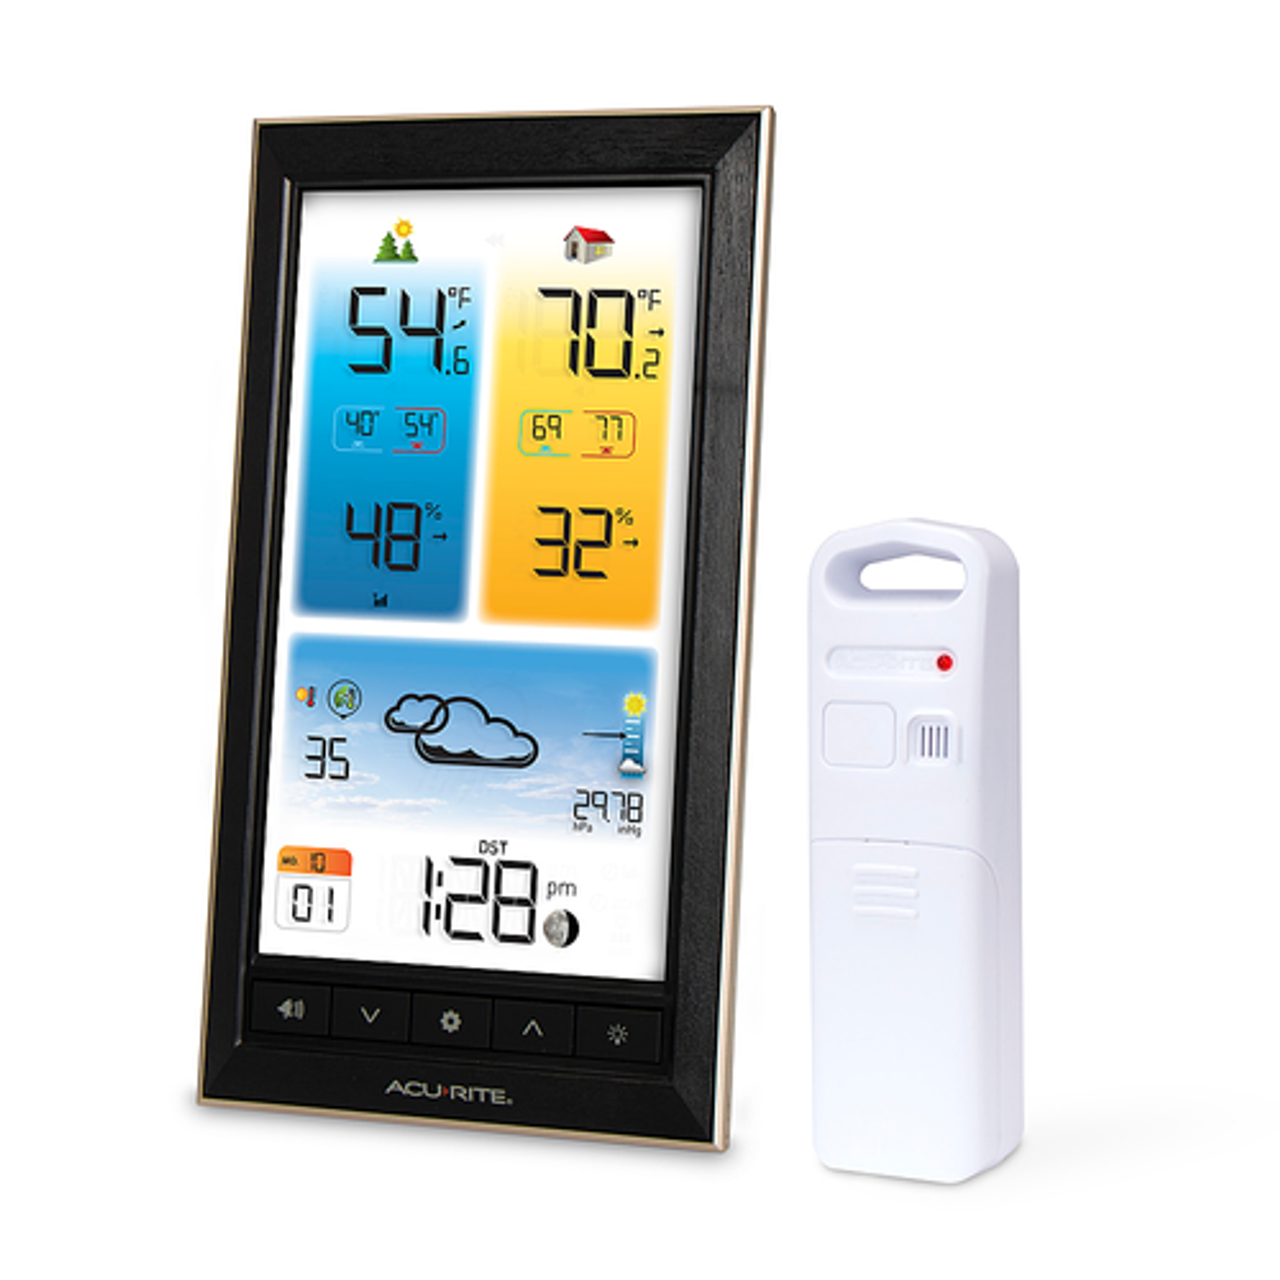 AcuRite Home Weather Station with Color Display, Wireless Outdoor Thermometer for Indoor/Outdoor Temperature & Humidity - Black